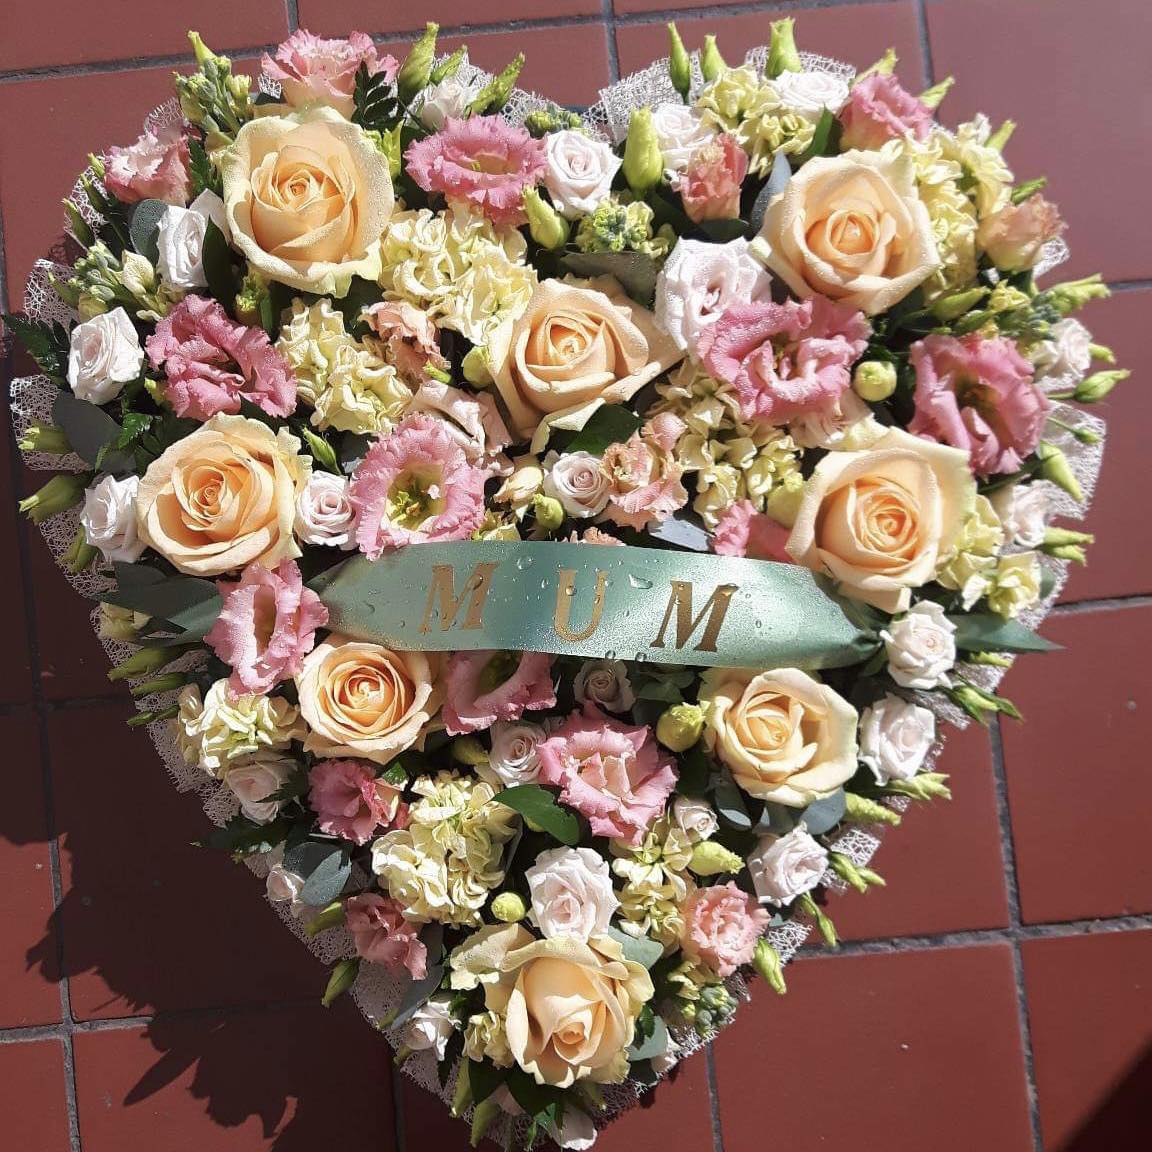 A funeral wreath from Flowers for You, Dalbeattie, using pink roses and lilies